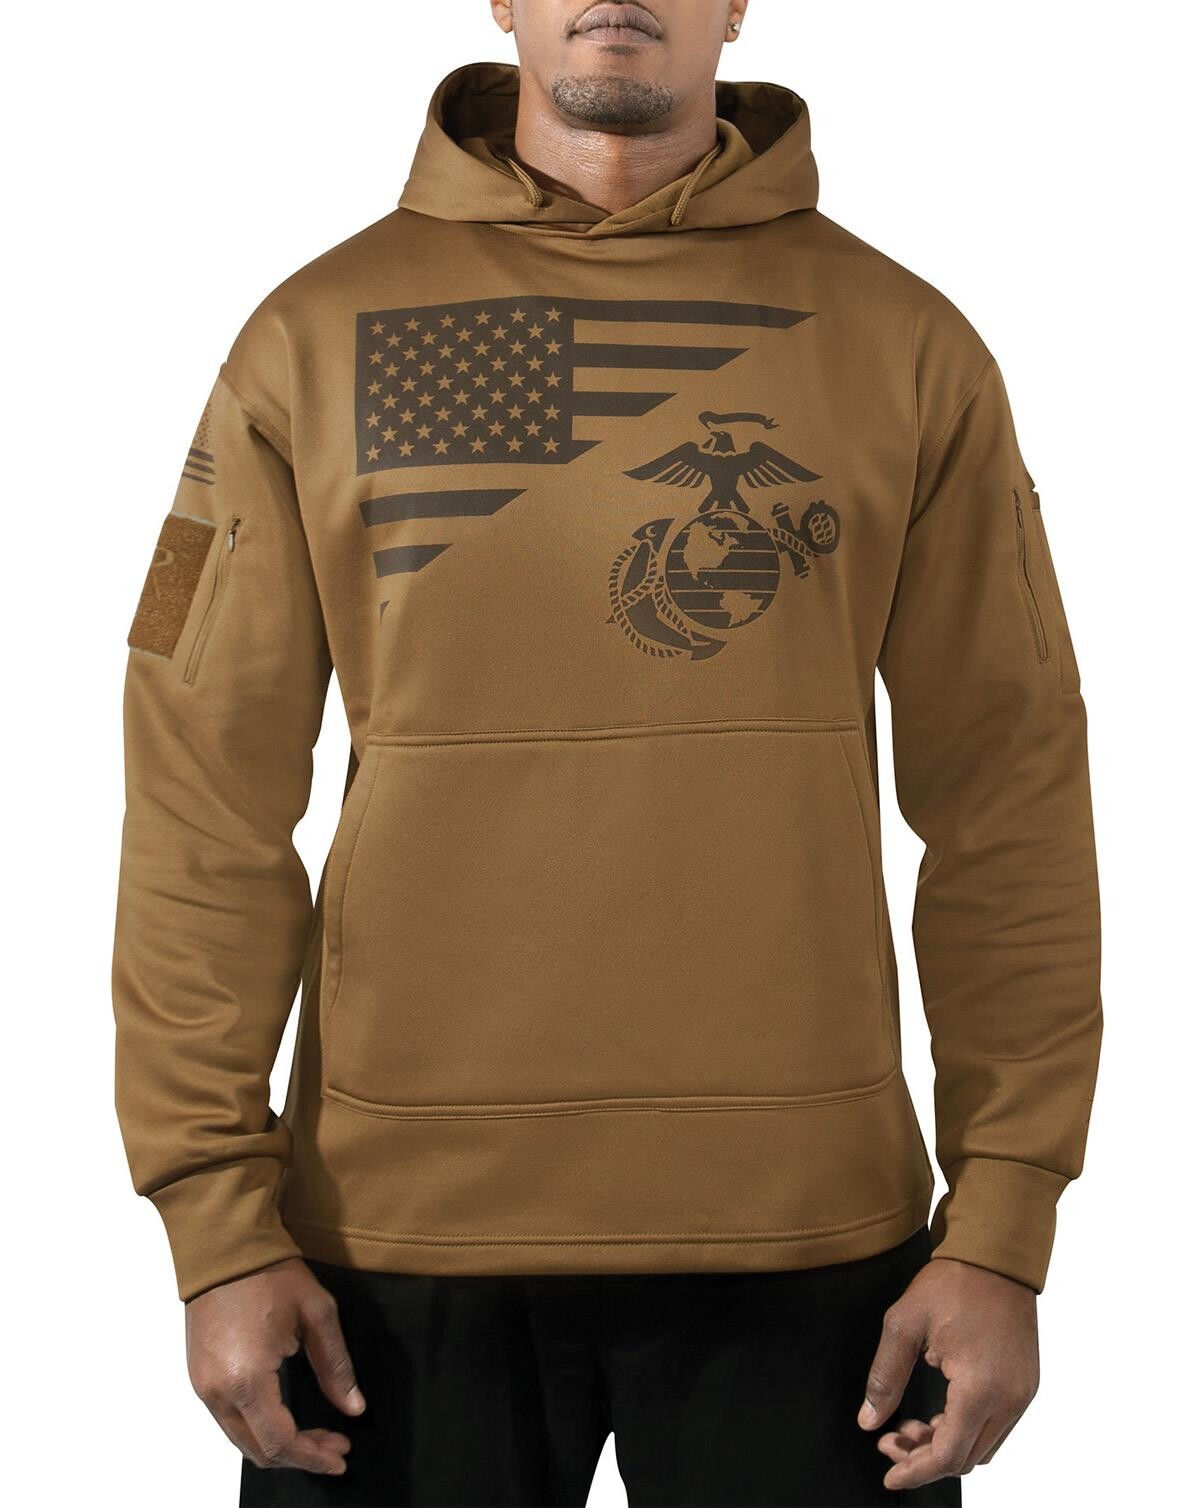 Rothco US Flag Concealed Carry Hoodie (Coyote Brun, M)